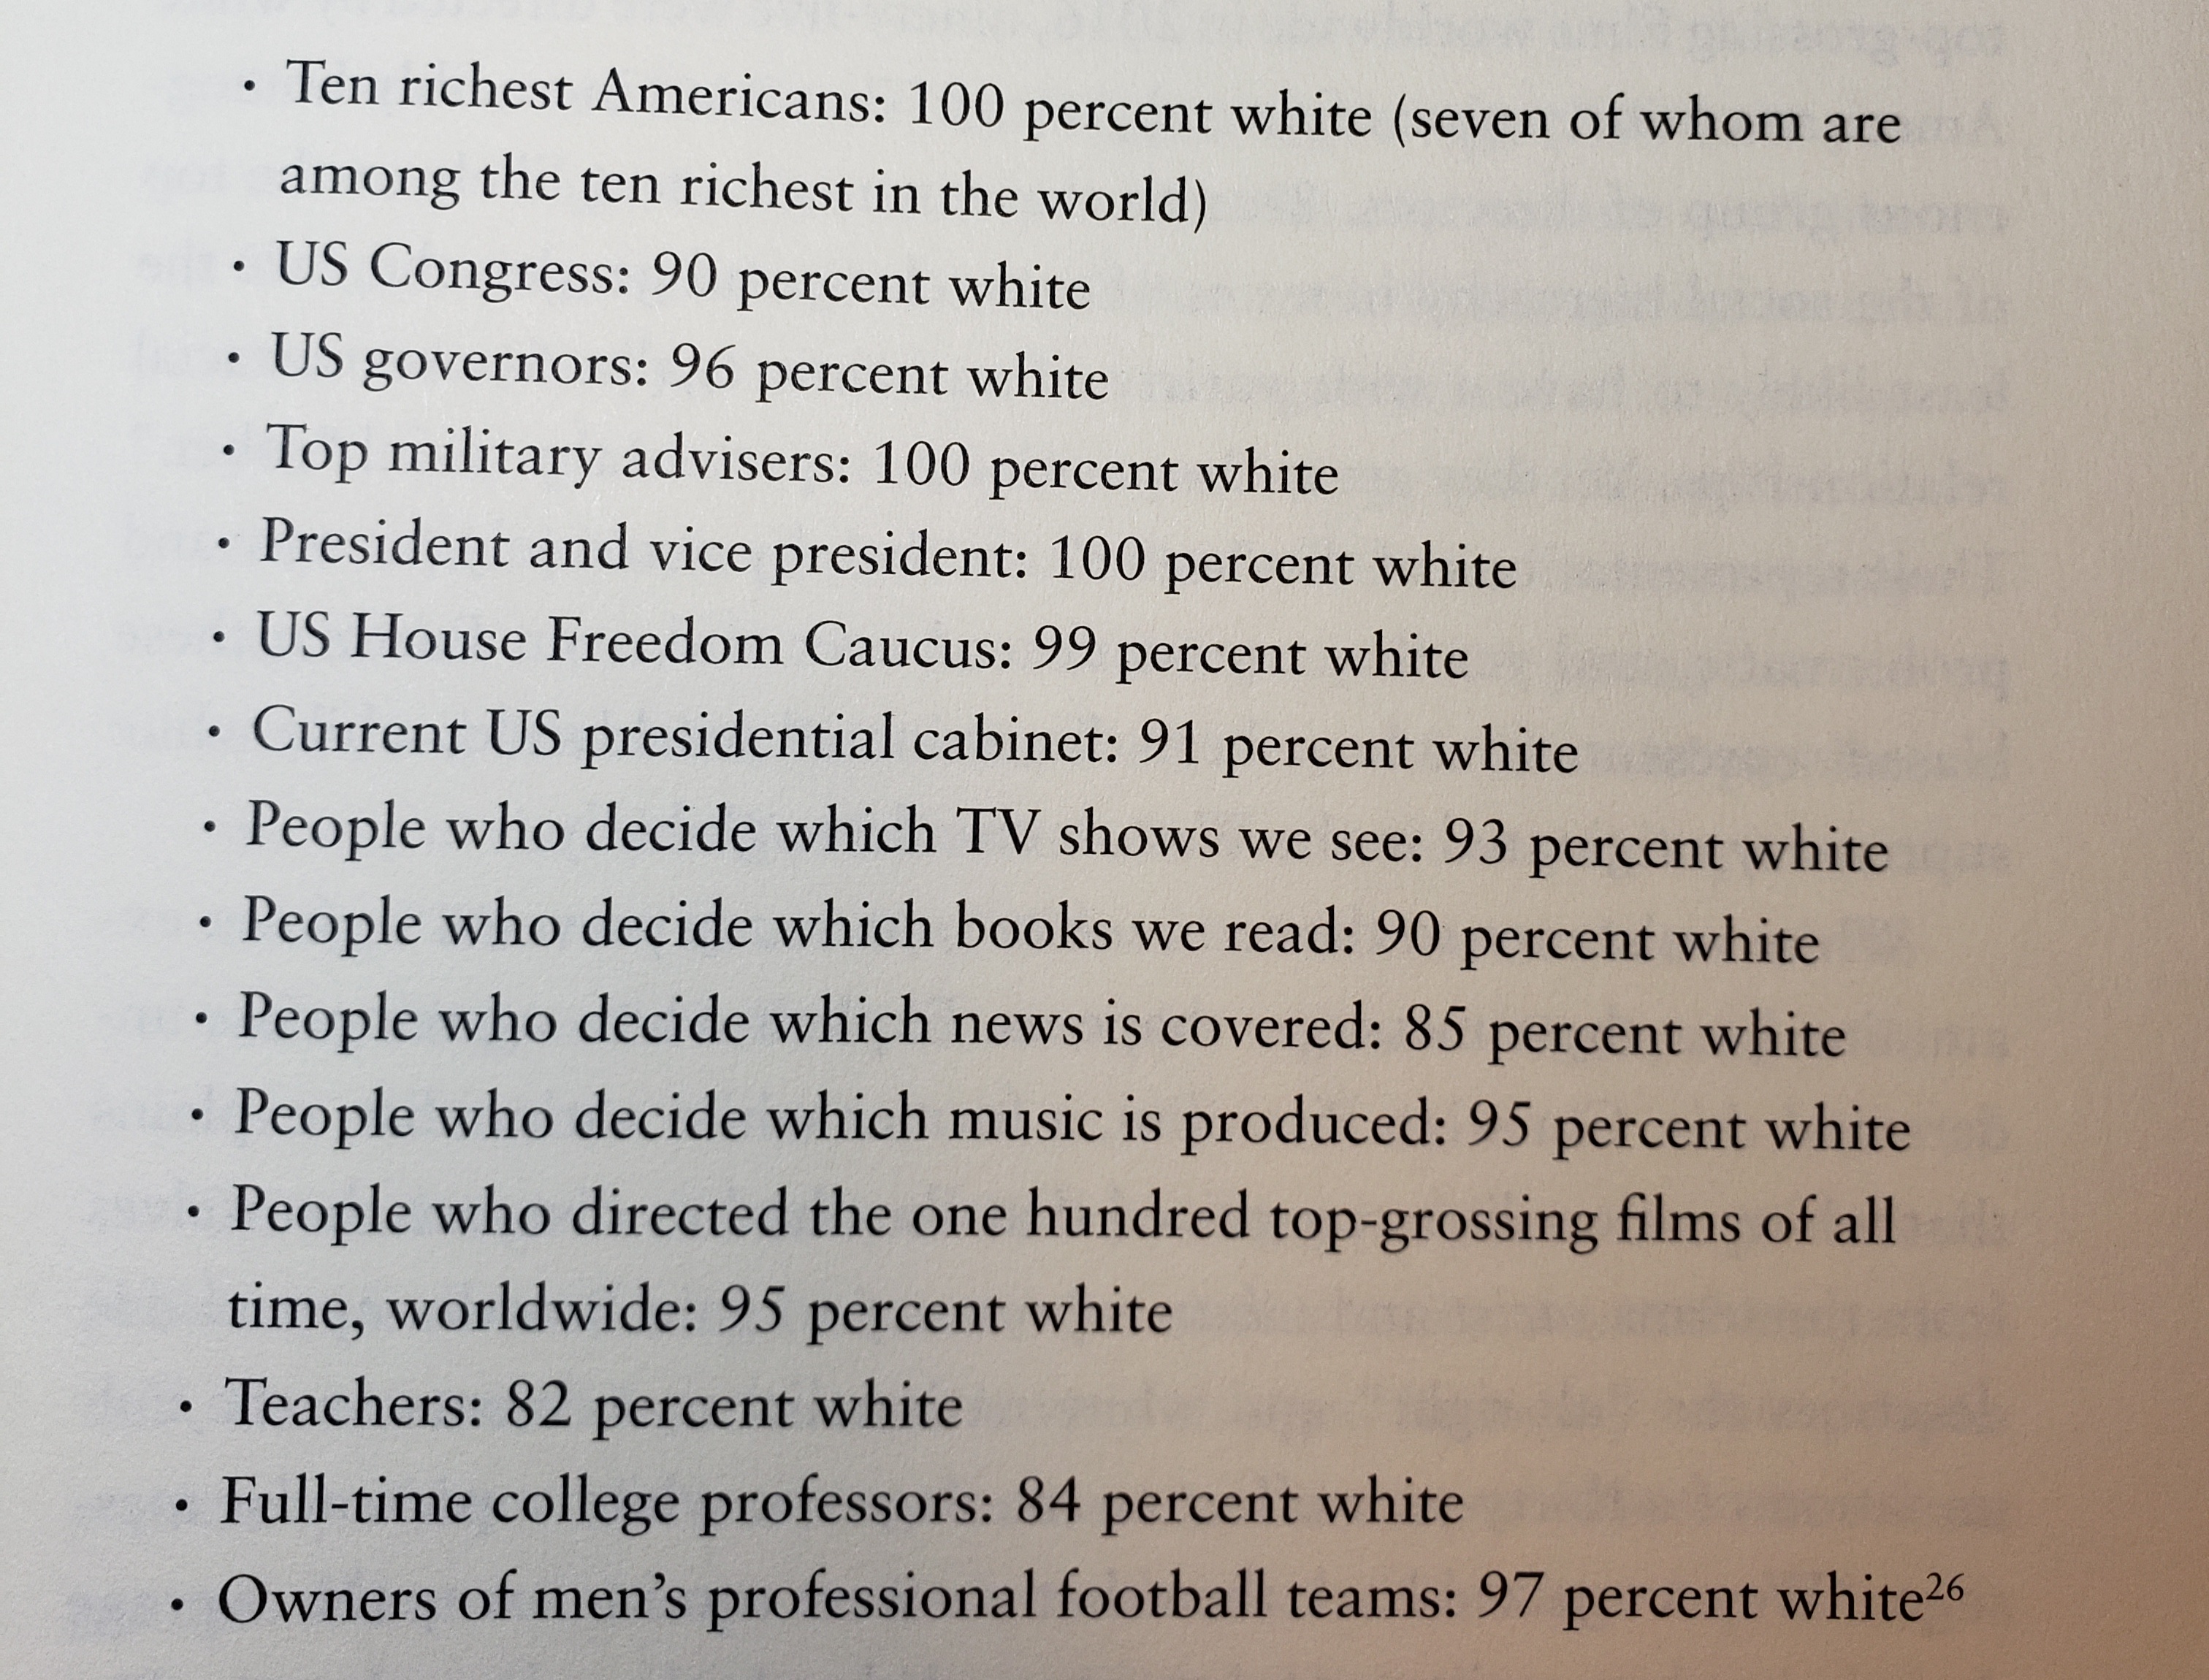 Bullet list of people in power, with percentages that are white